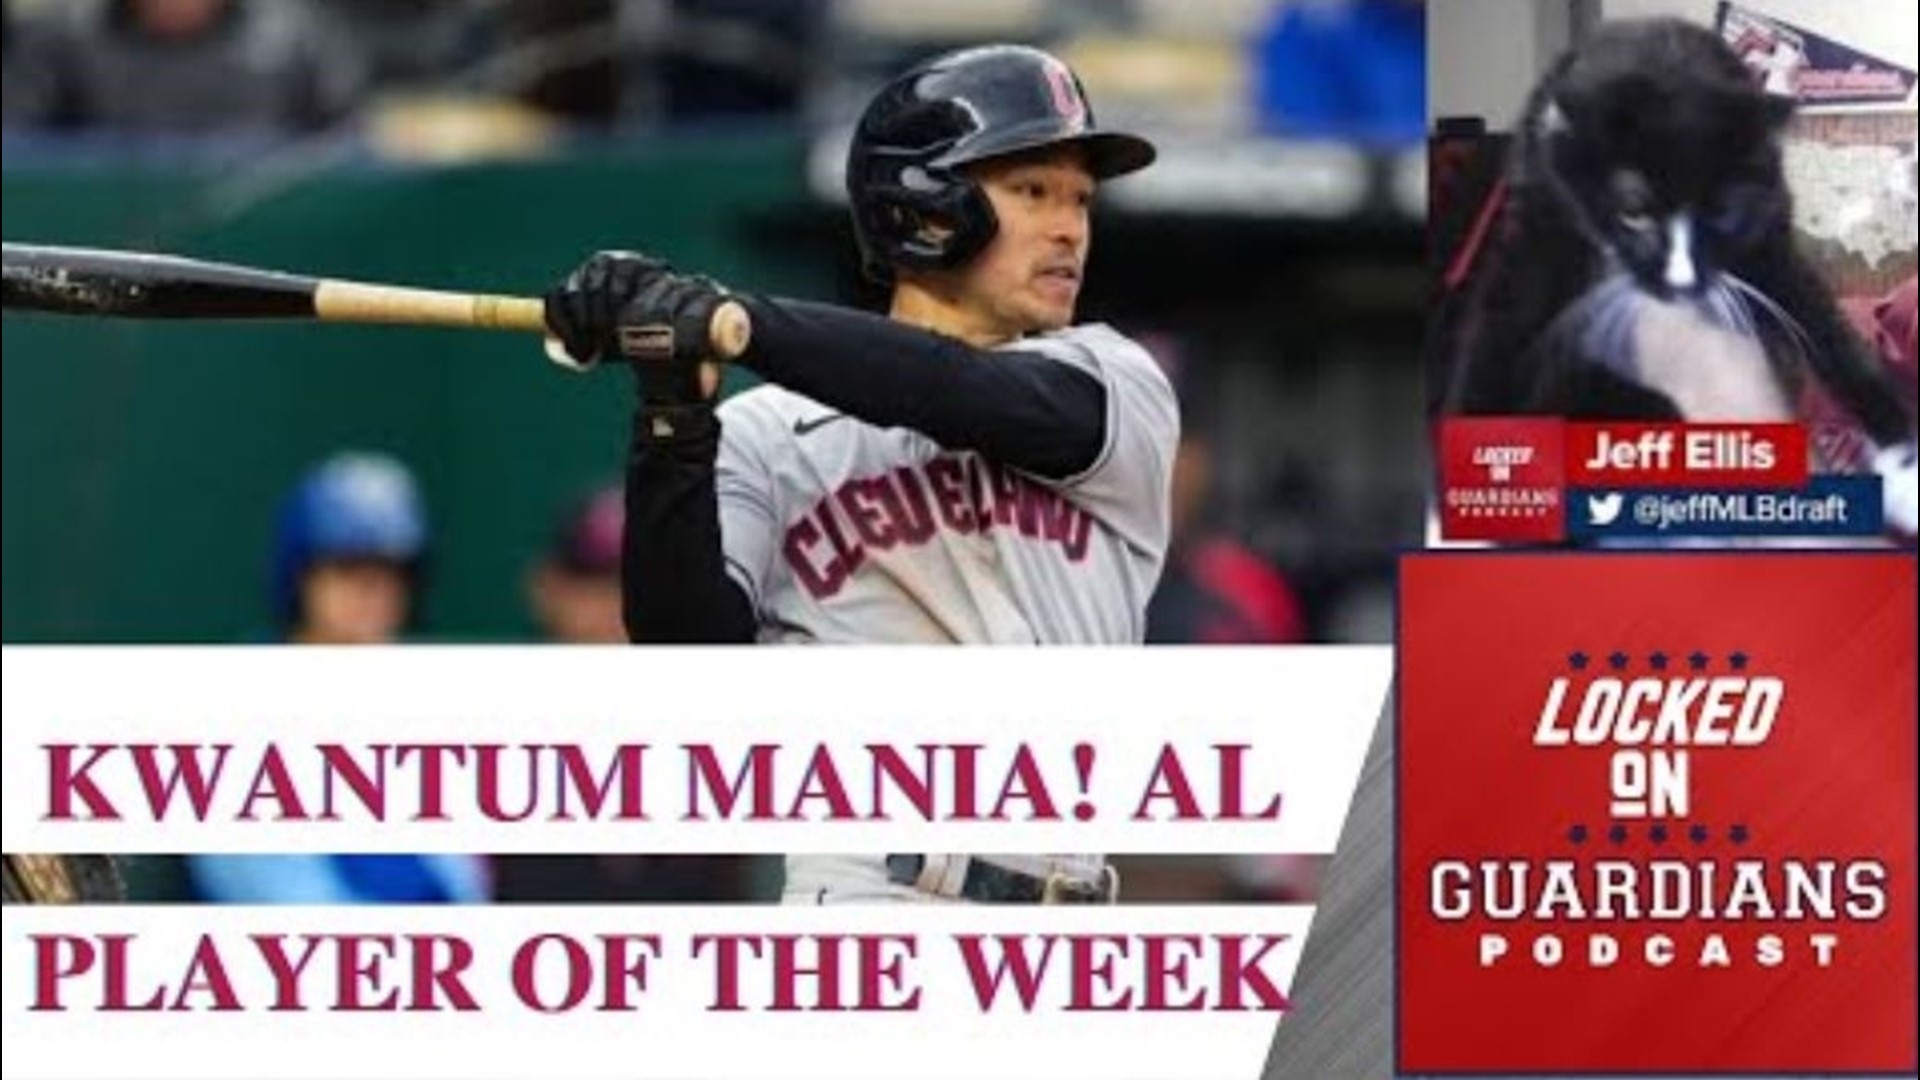 With the Cleveland Guardians heading into the playoffs, we’re also discussing that Steven Kwan won his first player of the week awards.